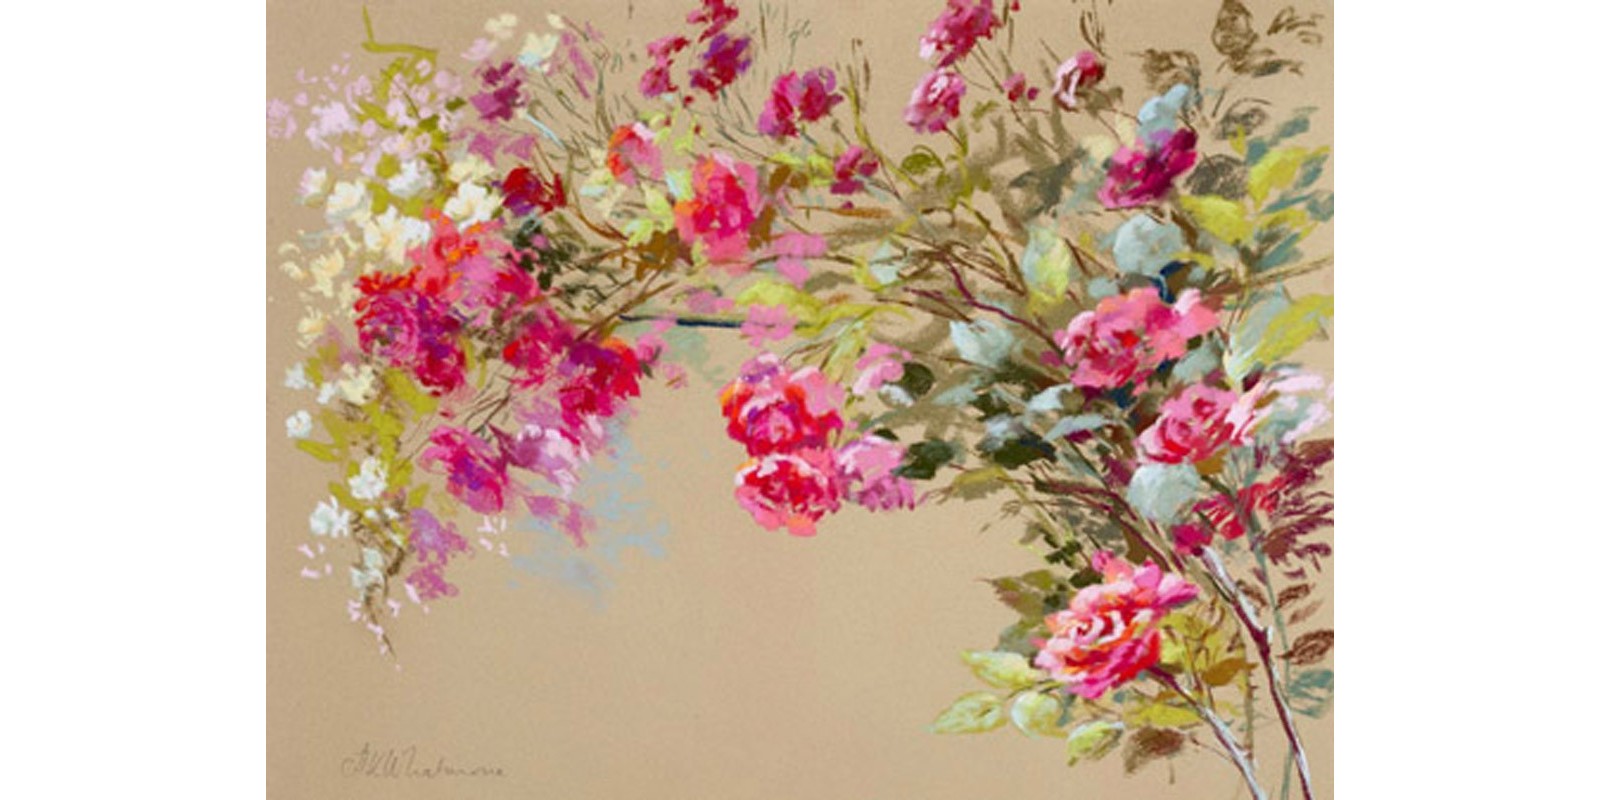 Nel Whatmore - The Garden of the Rose II